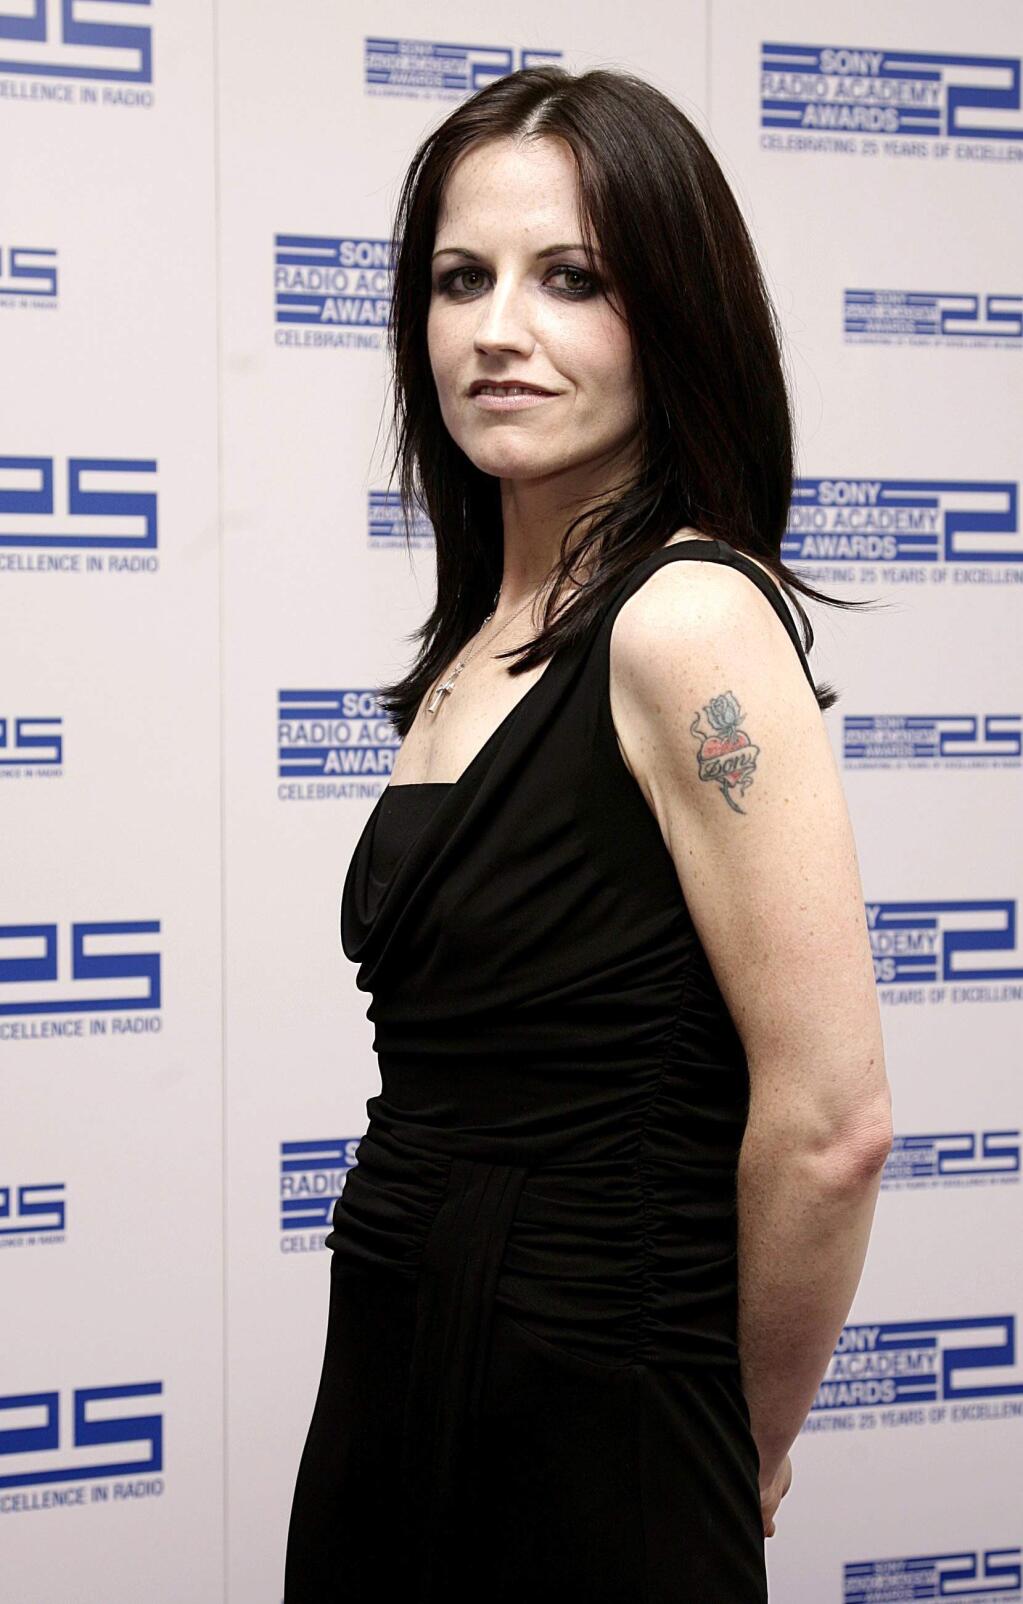 FILE - In this April 30, 2004 file photo, singer Dolores O'Riordan poses for photographers at the Sony Radio Academy Awards 2007, in London. Dolores O'Riordan, lead singer of Irish band The Cranberries, has died. She was 46, it was reported Monday, Jan. 15, 2018. (Yui Mok/PA via AP, File)